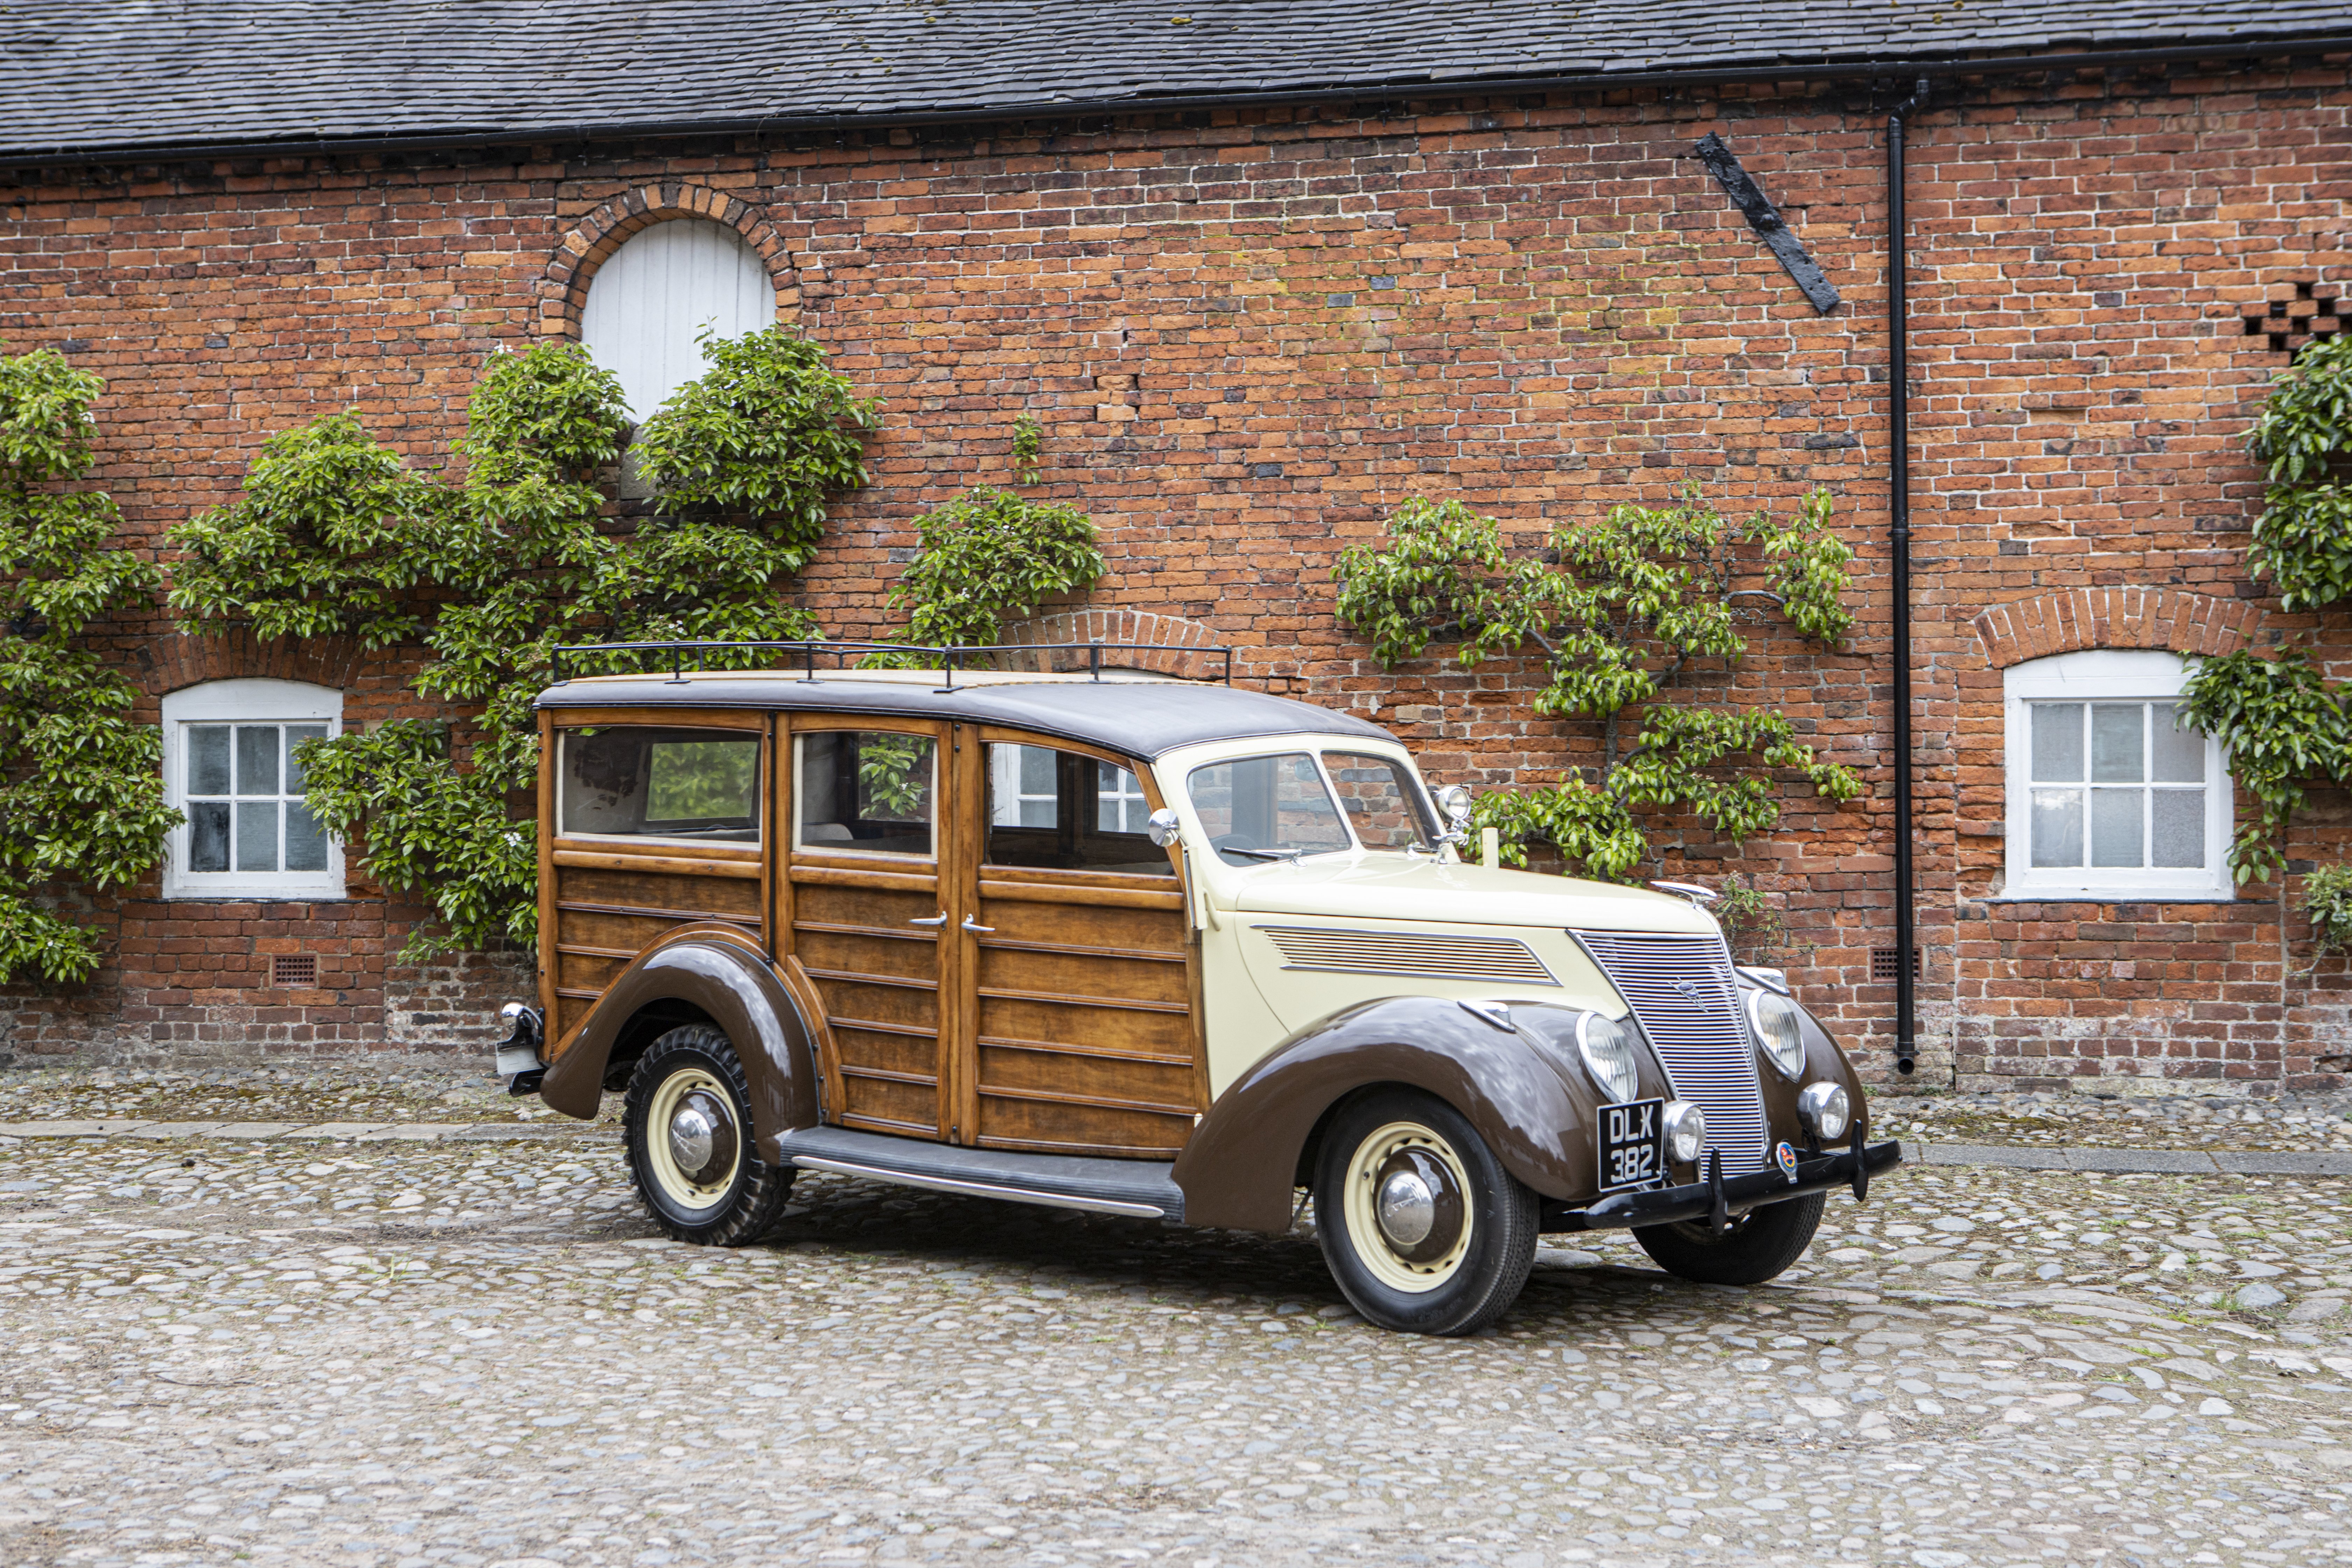 1937 Ford V8 'Woody' Station Wagon Chassis no. 790097 - Image 18 of 24